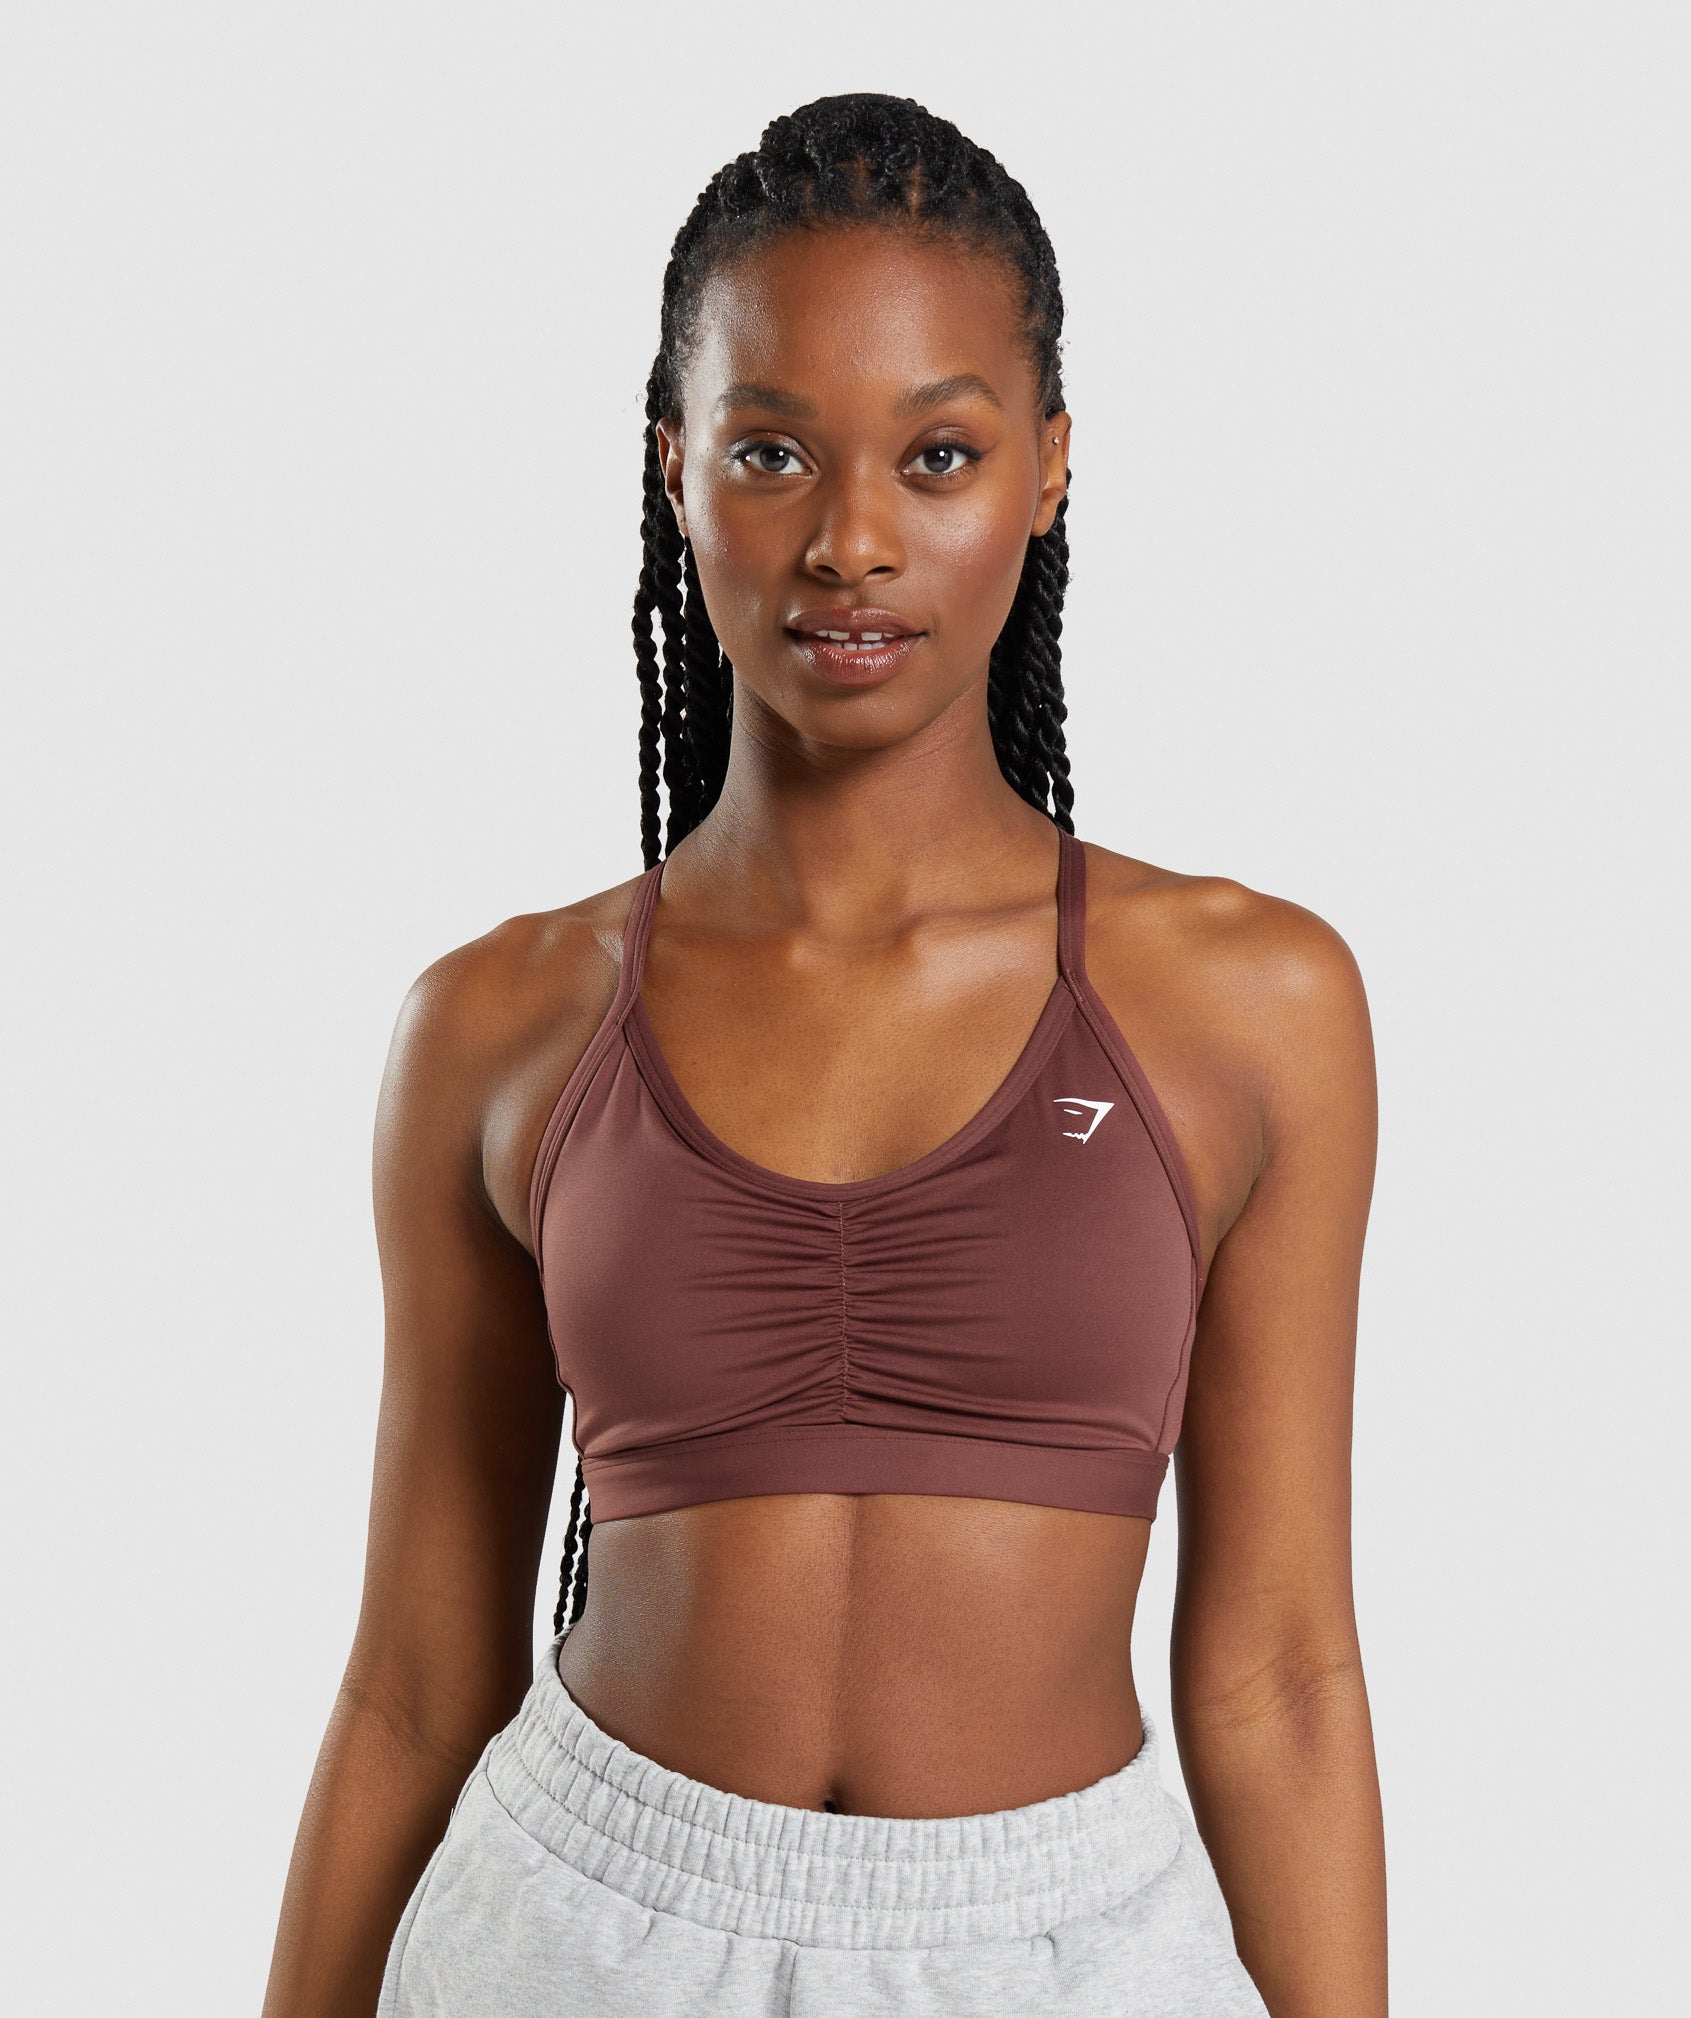 Gymshark Ruched Sports Bra - Winter Teal